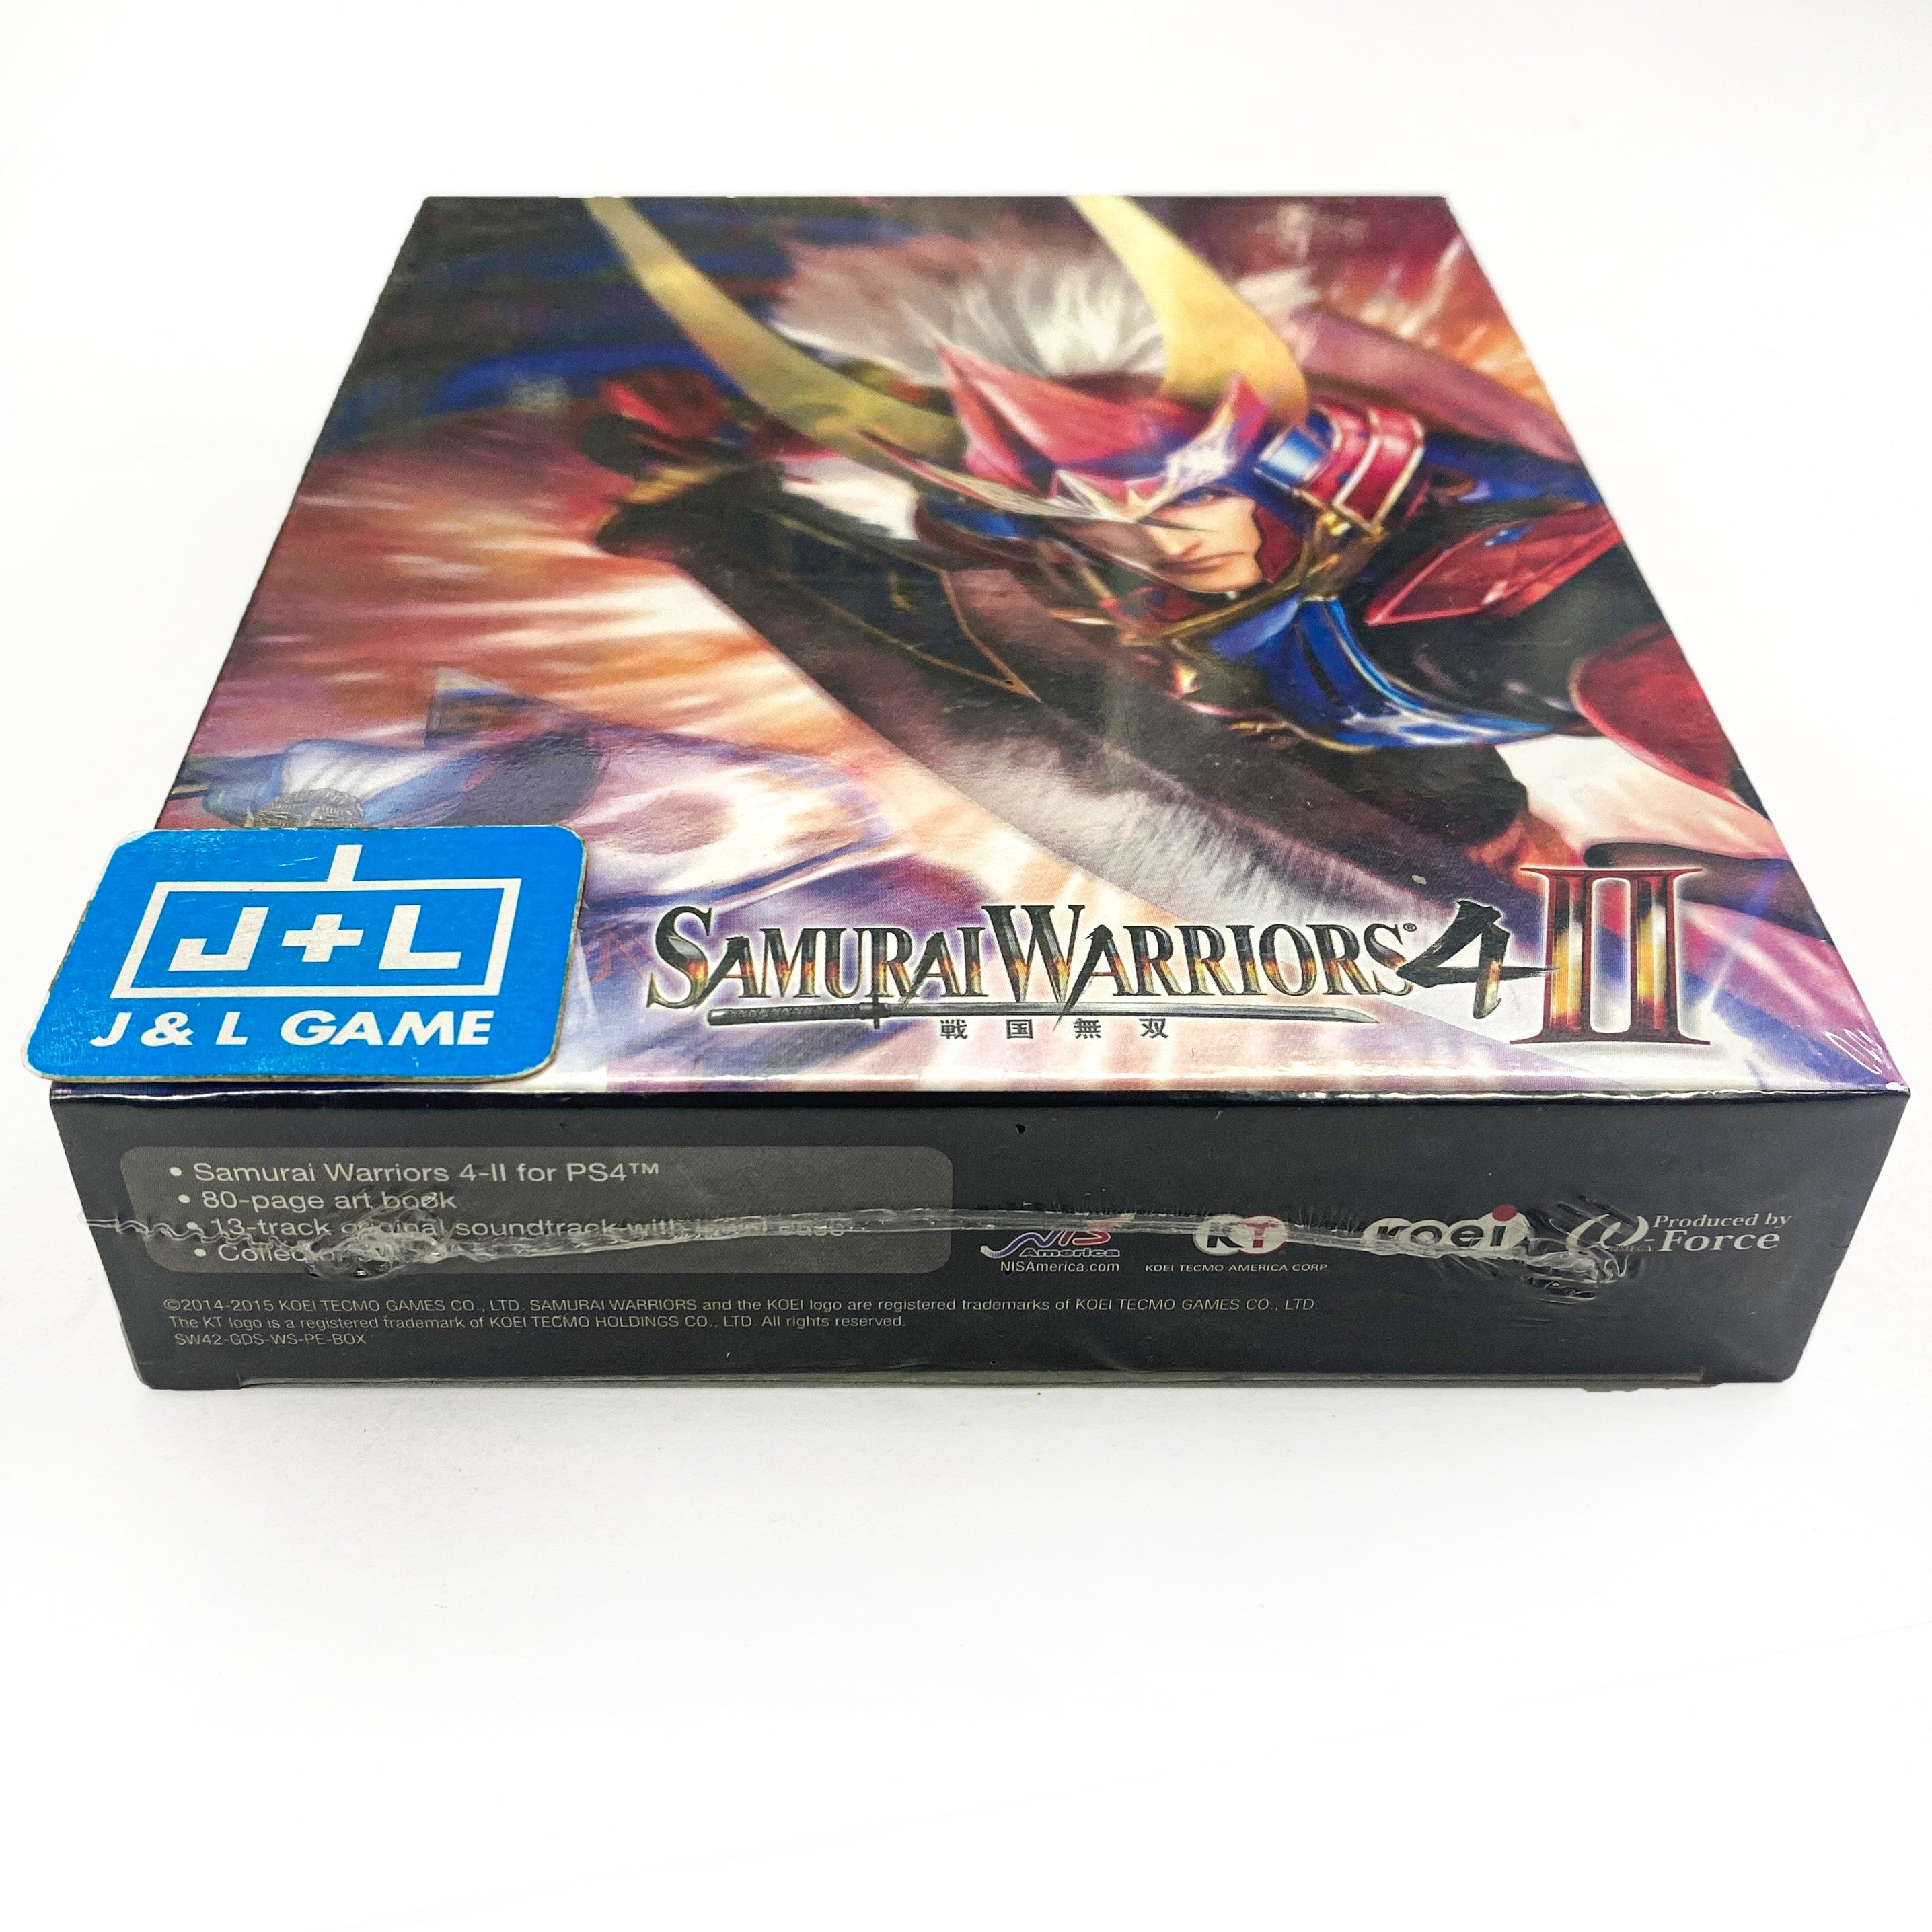 Samurai Warriors 4-II (Limited Edition) - (PS4) PlayStation 4 Video Games Koei Tecmo Games   